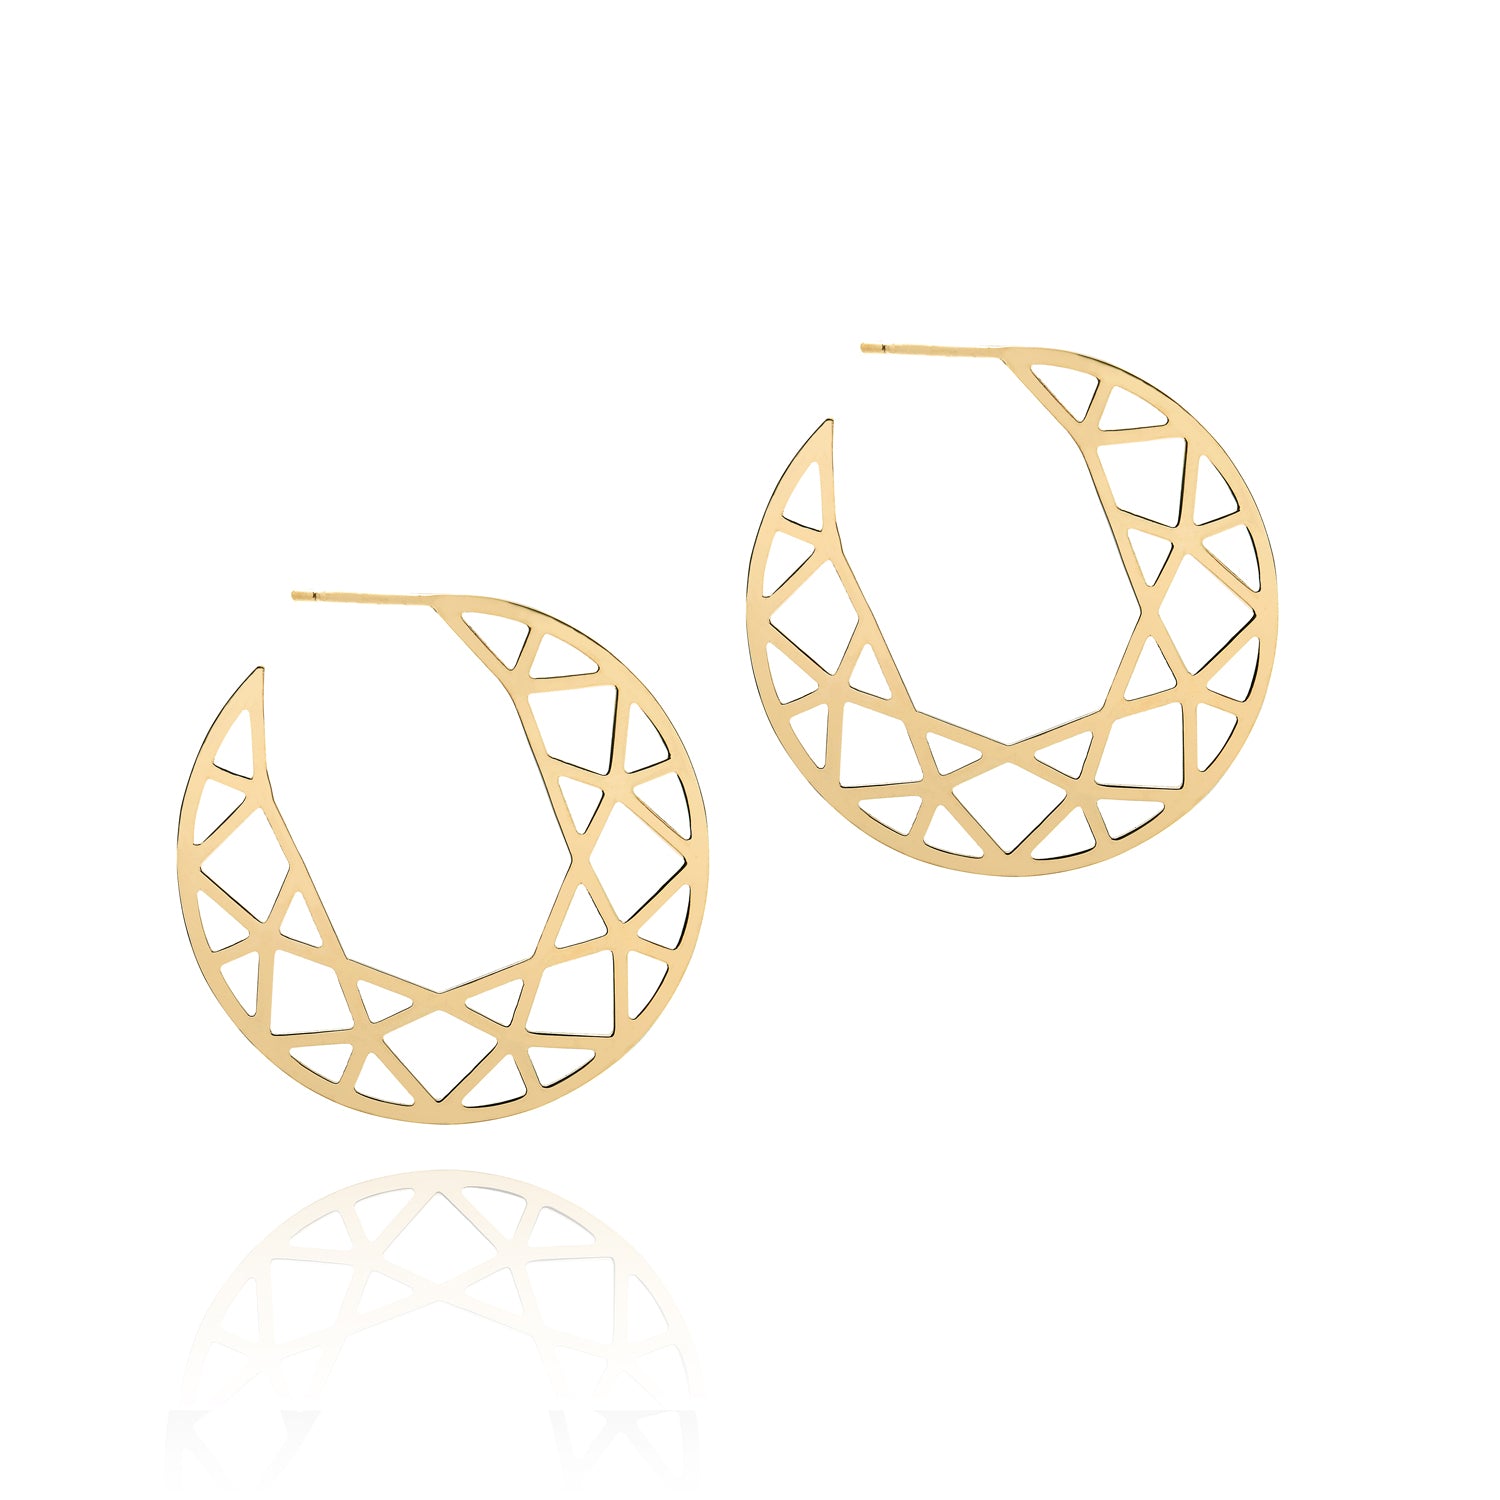 Gold-plated Earrings